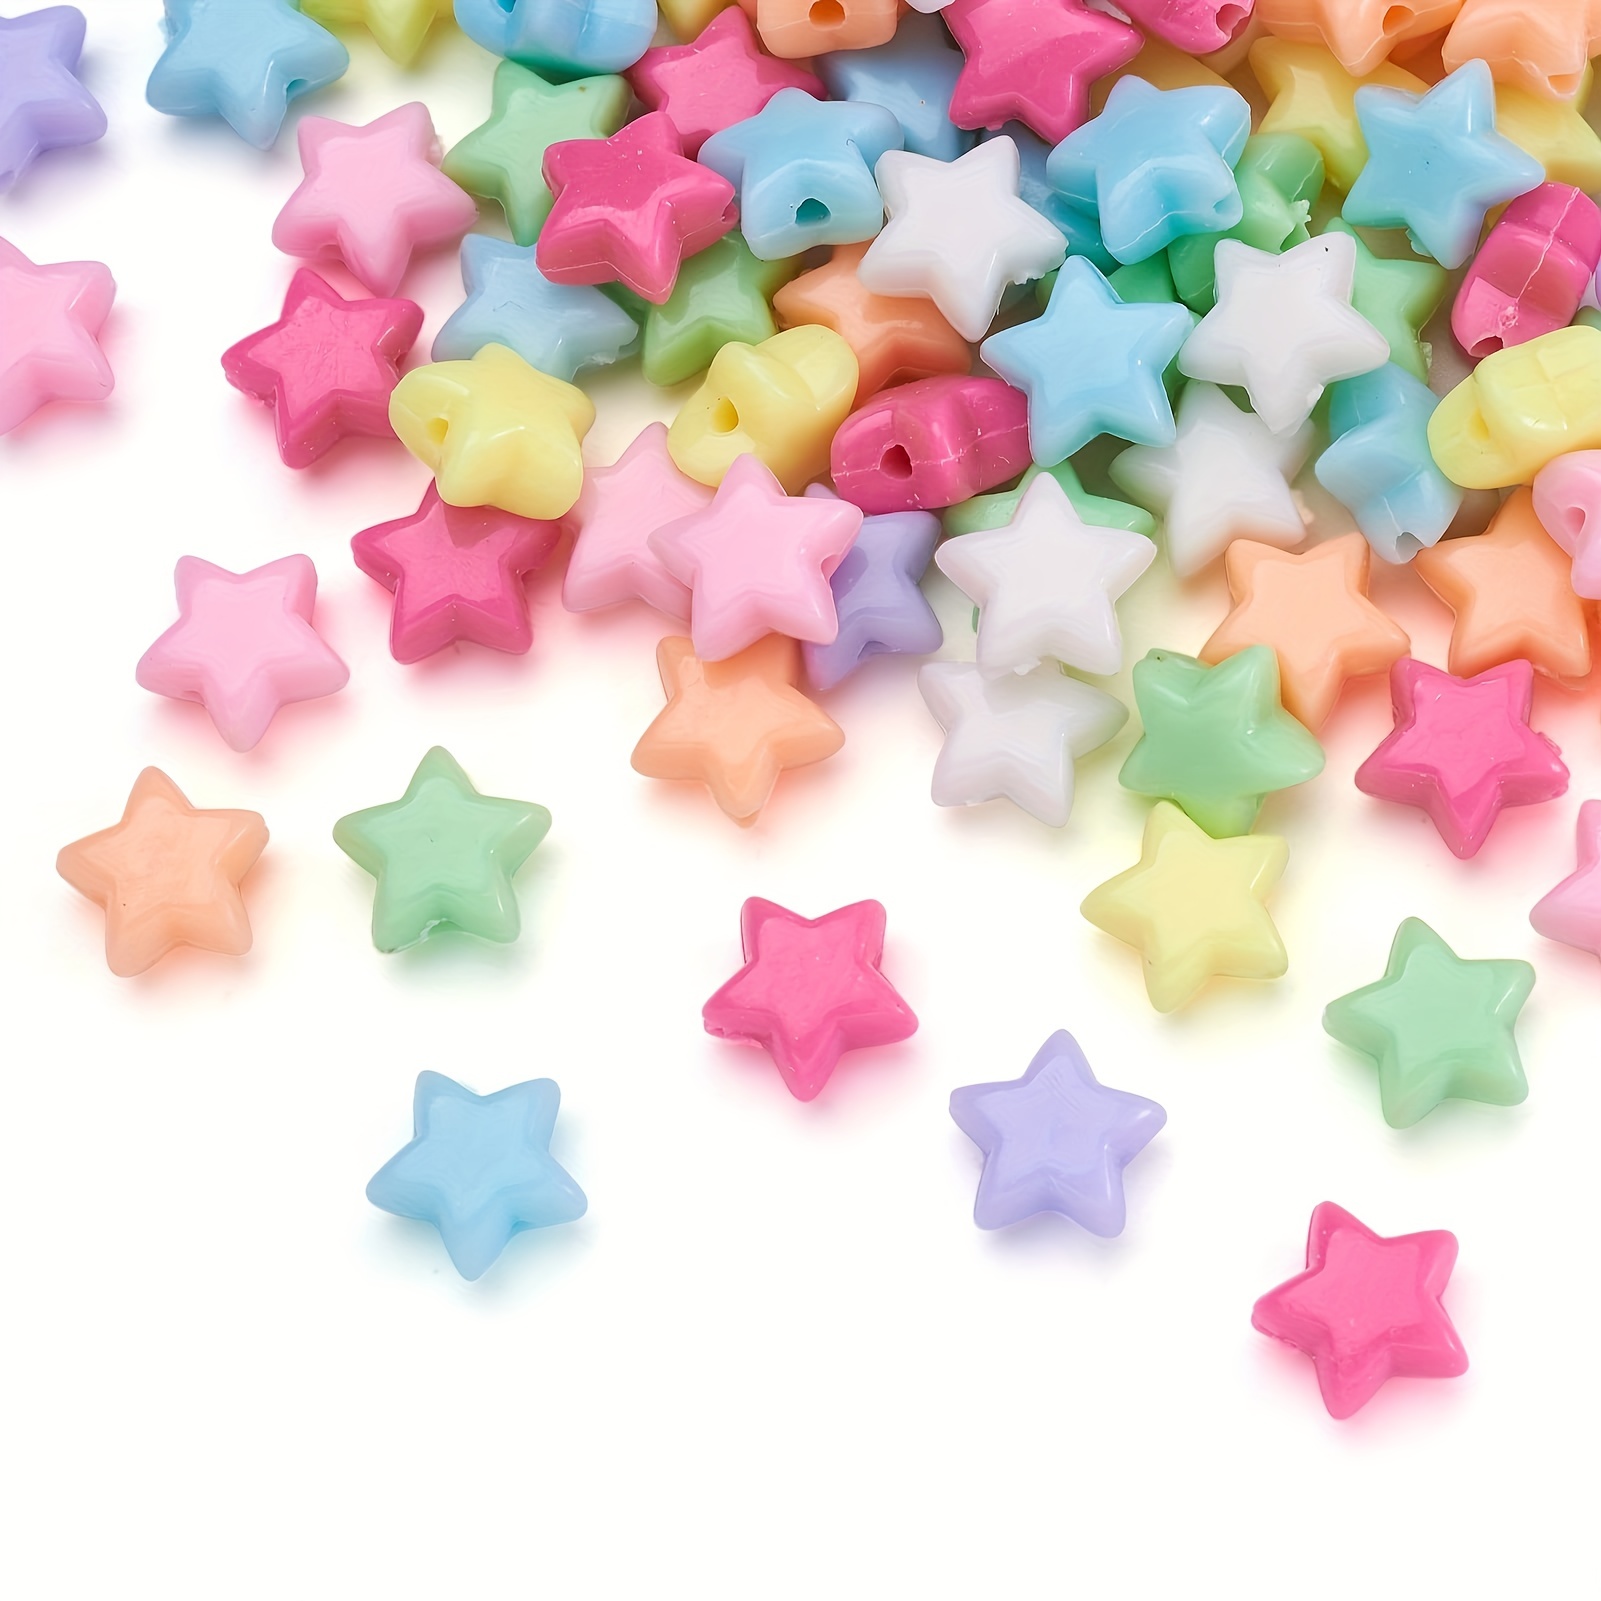 Craftdady 200pcs Transparent Random Mixed Colors Acrylic Star Spacer Beads  12x11mm Round Bead Inside Plastic Loose Charms with 2mm Hole for DIY